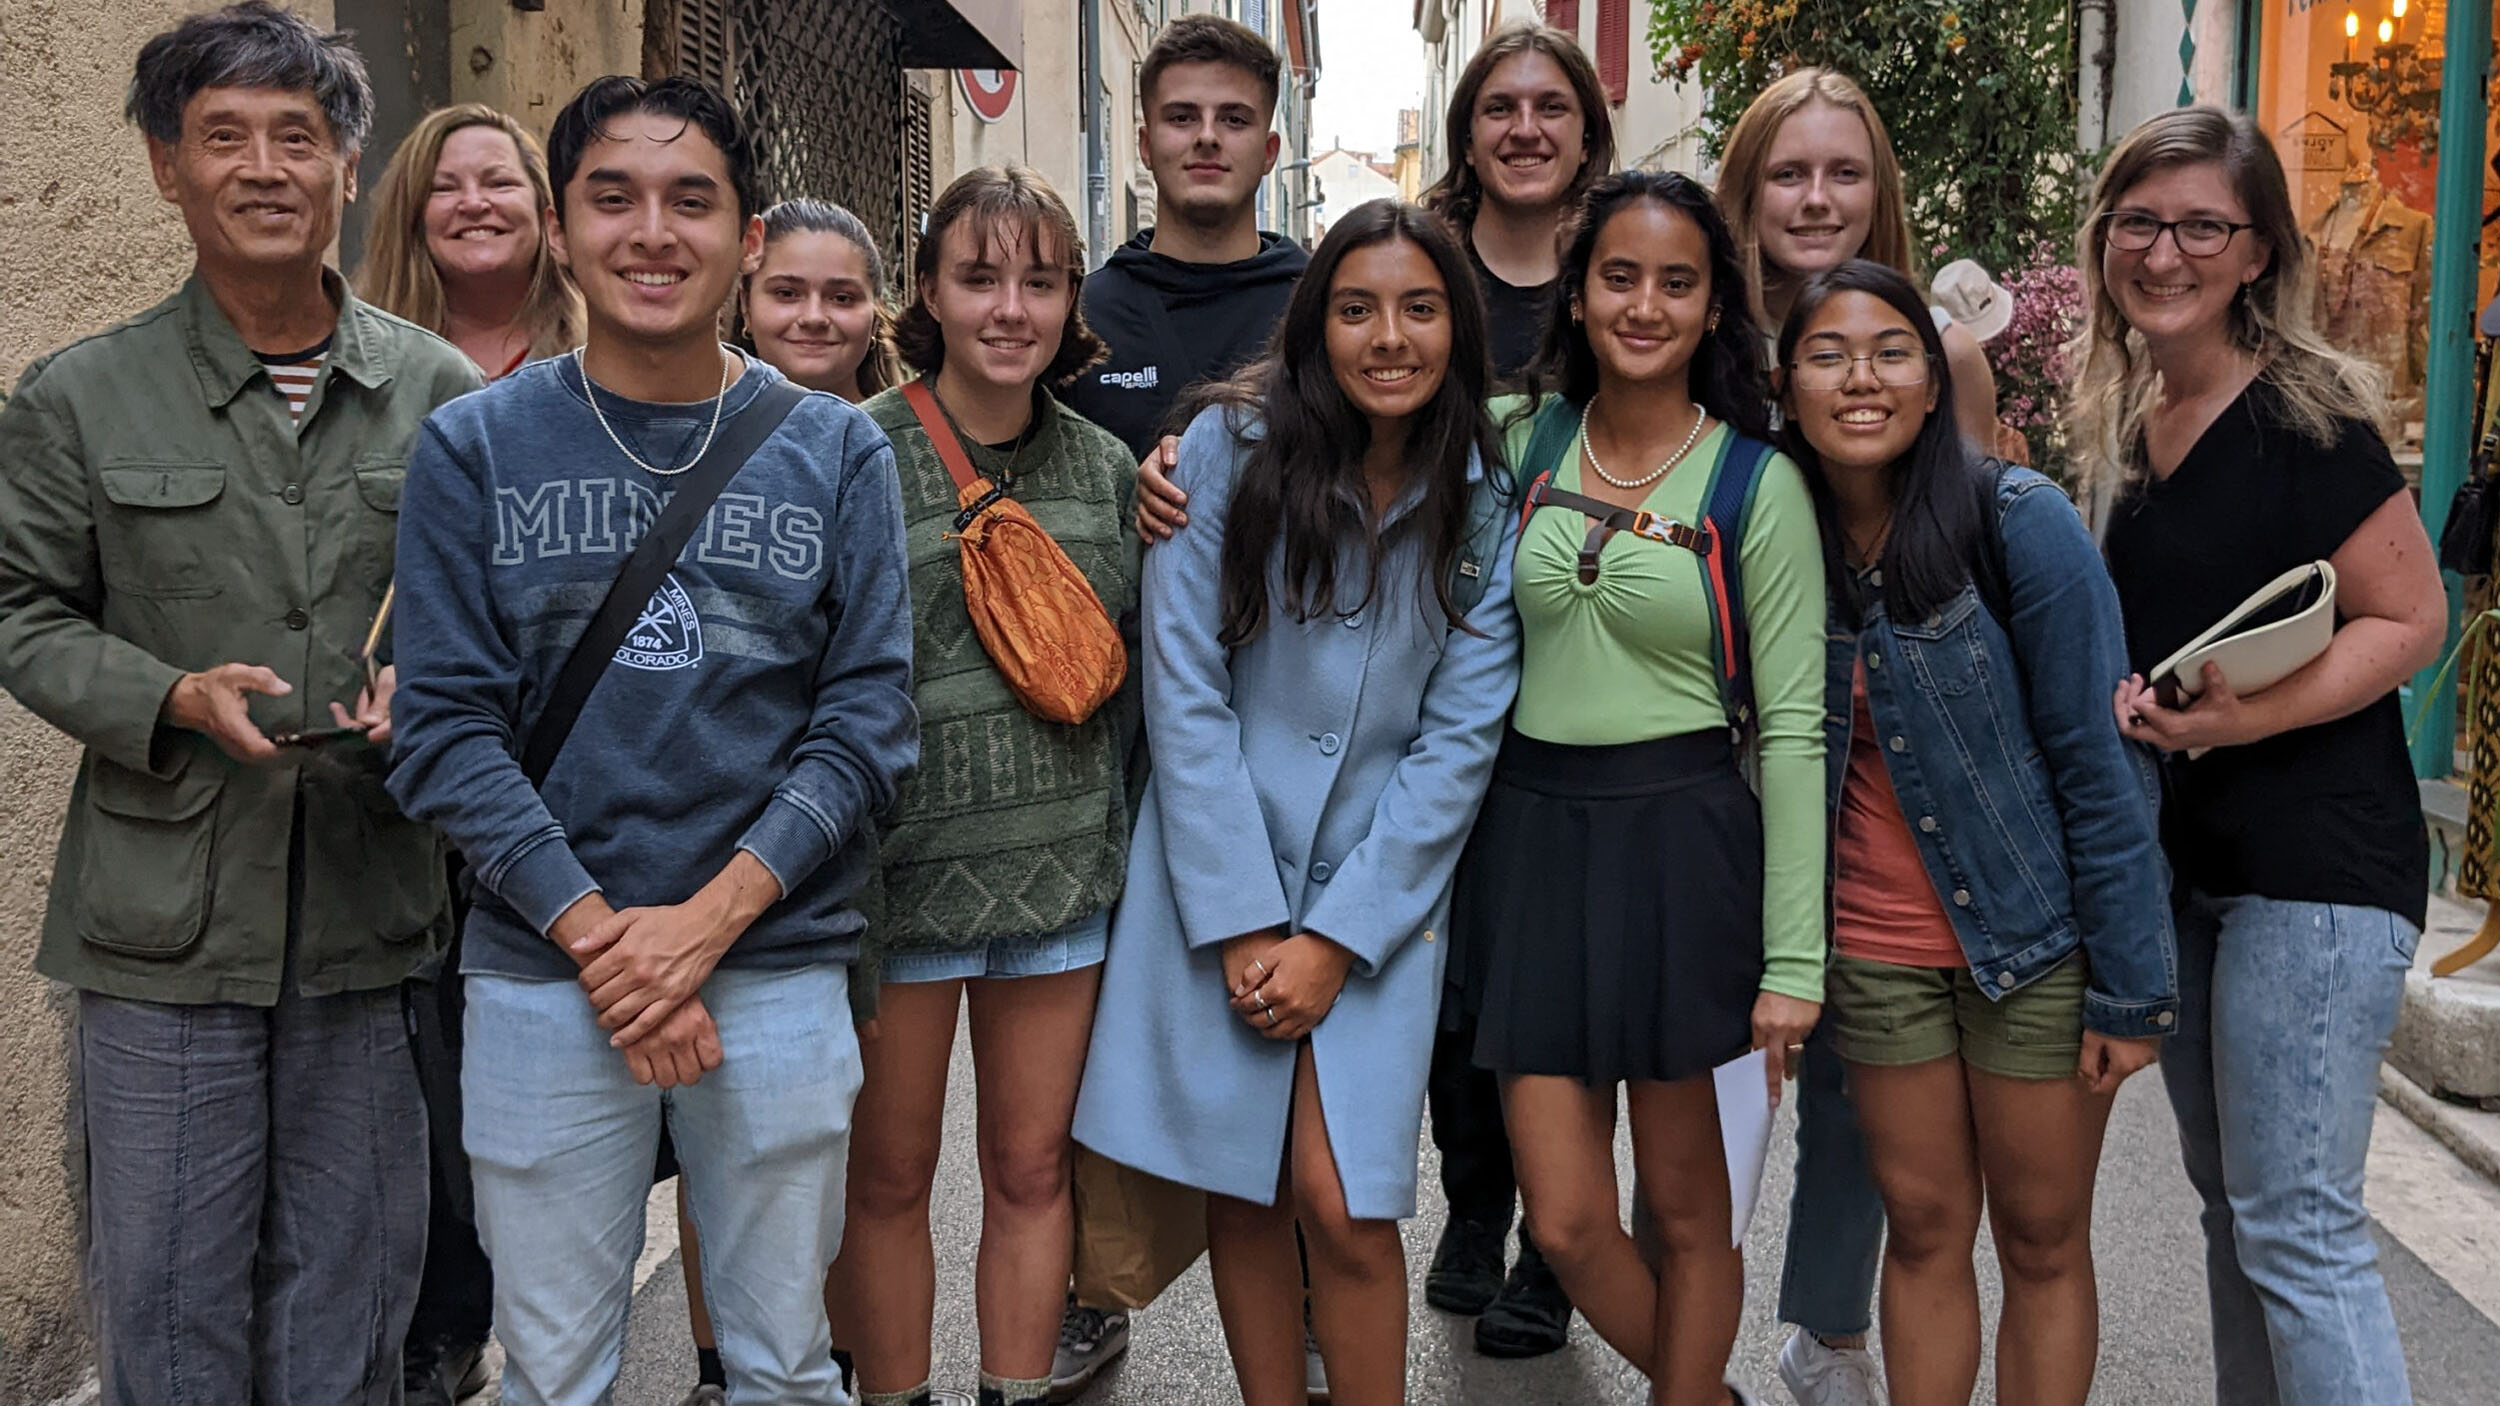 Group photo with college students, professors, and local artist, standing together on a narrow street in Antibes, France.